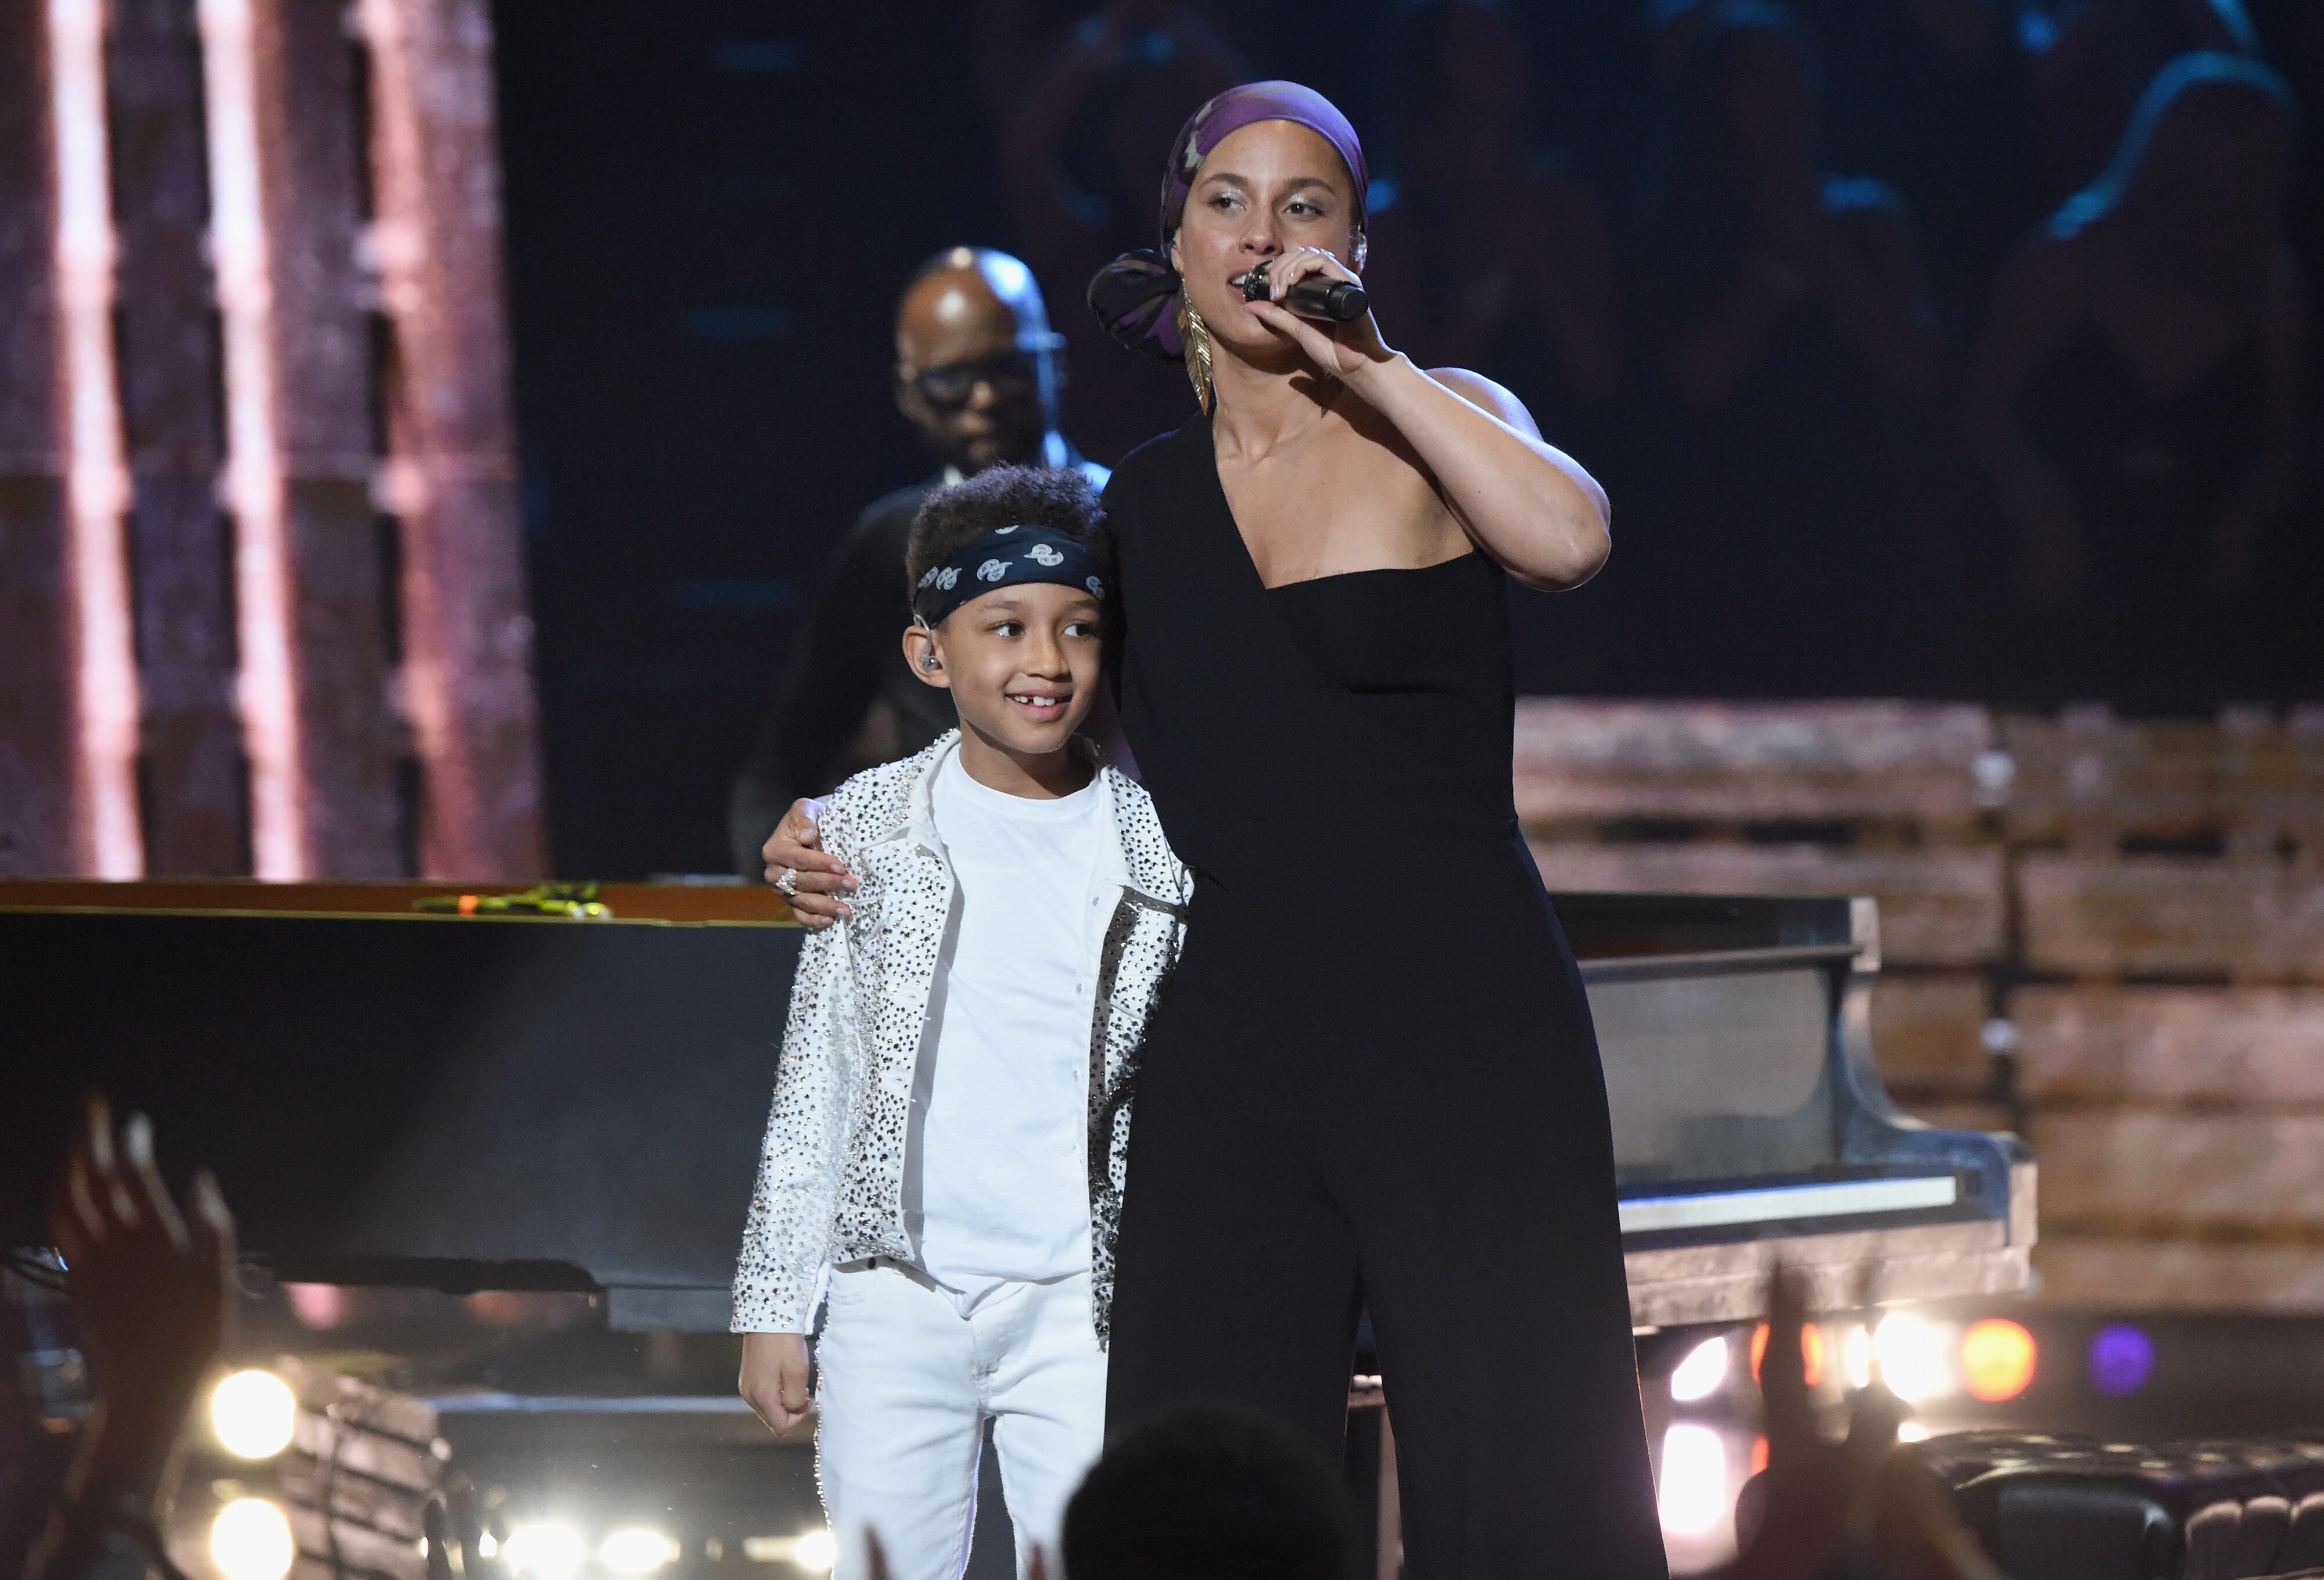 Alicia Keys on stage with son Egypt at the 2019 iHeartRadio Music Awards/ Source: Getty Images